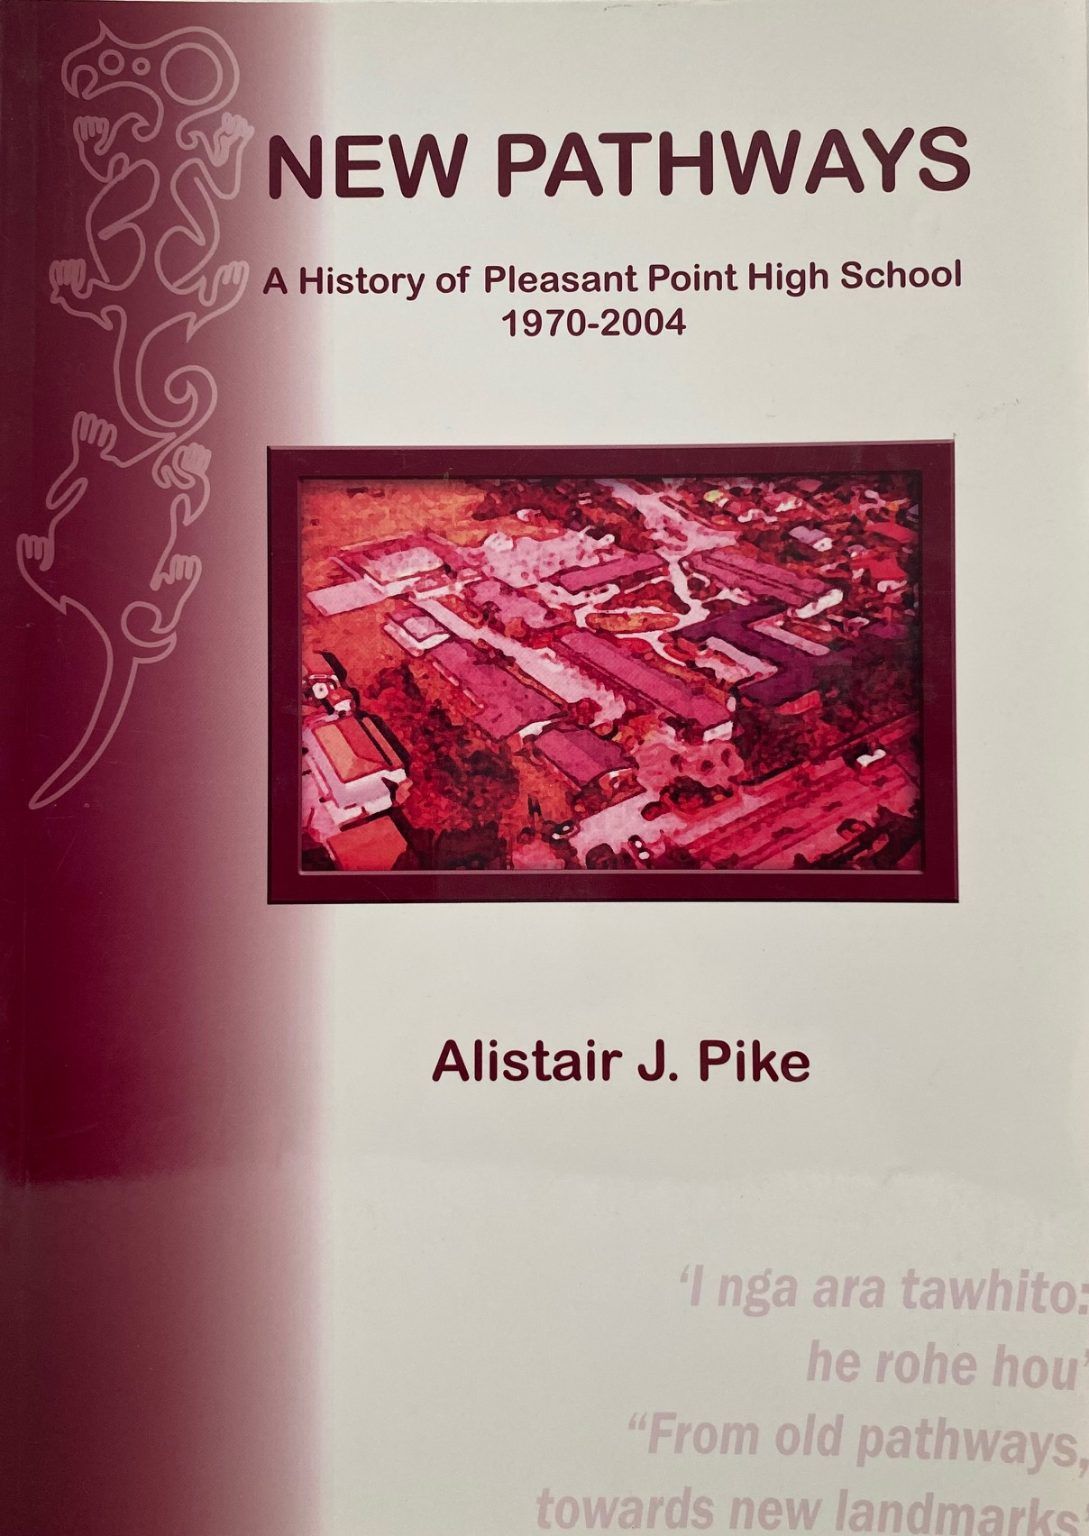 NEW PATHWAYS: A History of Pleasant Point High School 1970 - 2004